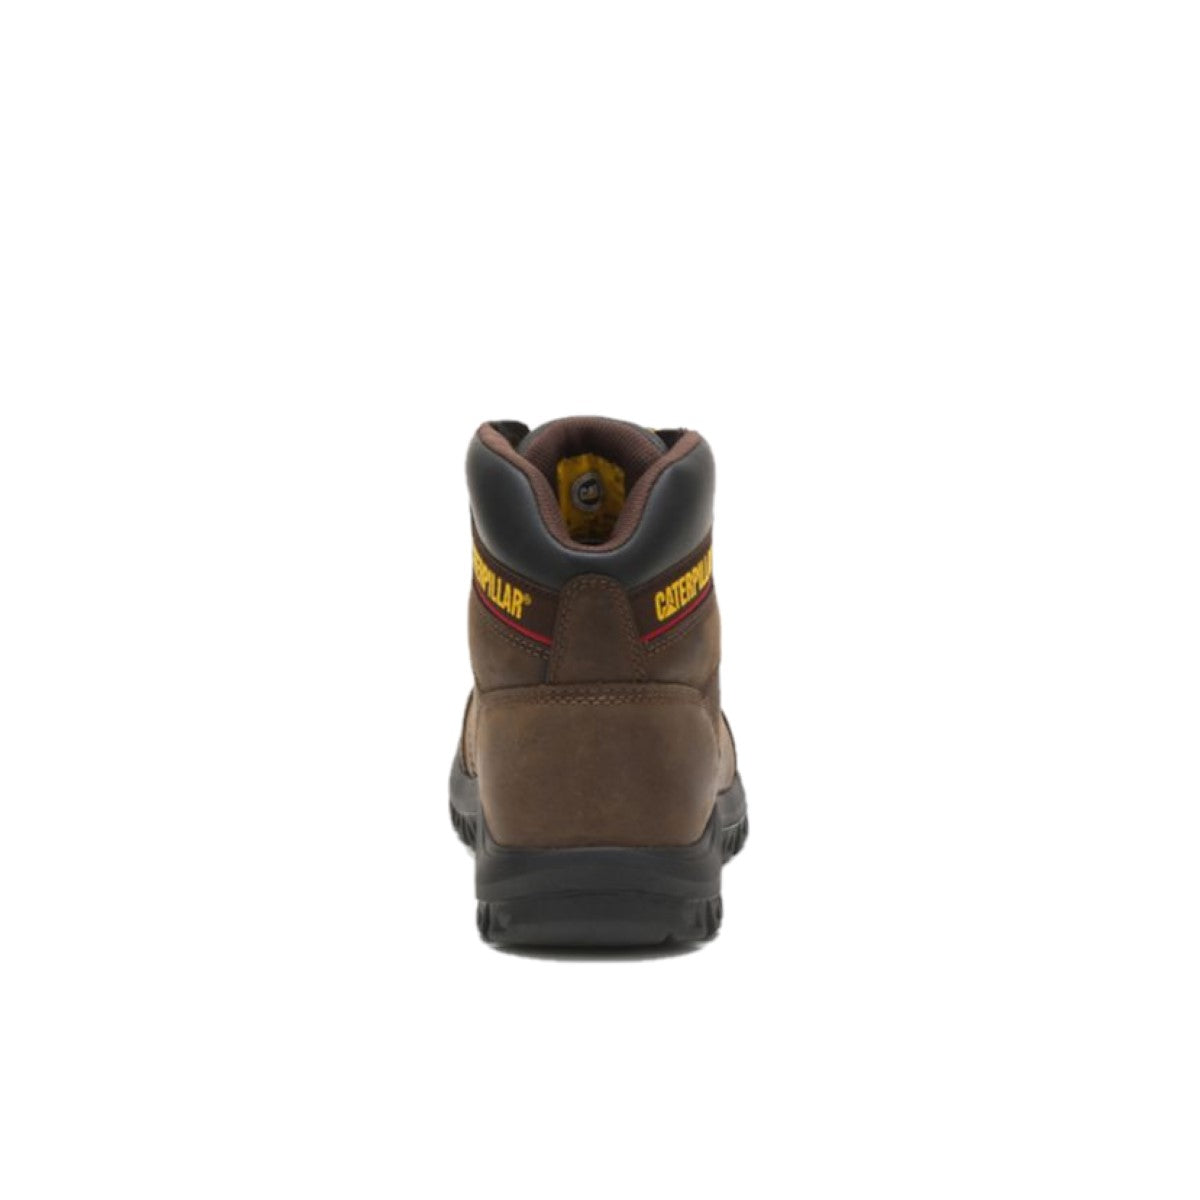 CATERPILLAR P74087-W OUTLINE MN'S (Wide) Brown Leather Work Boots